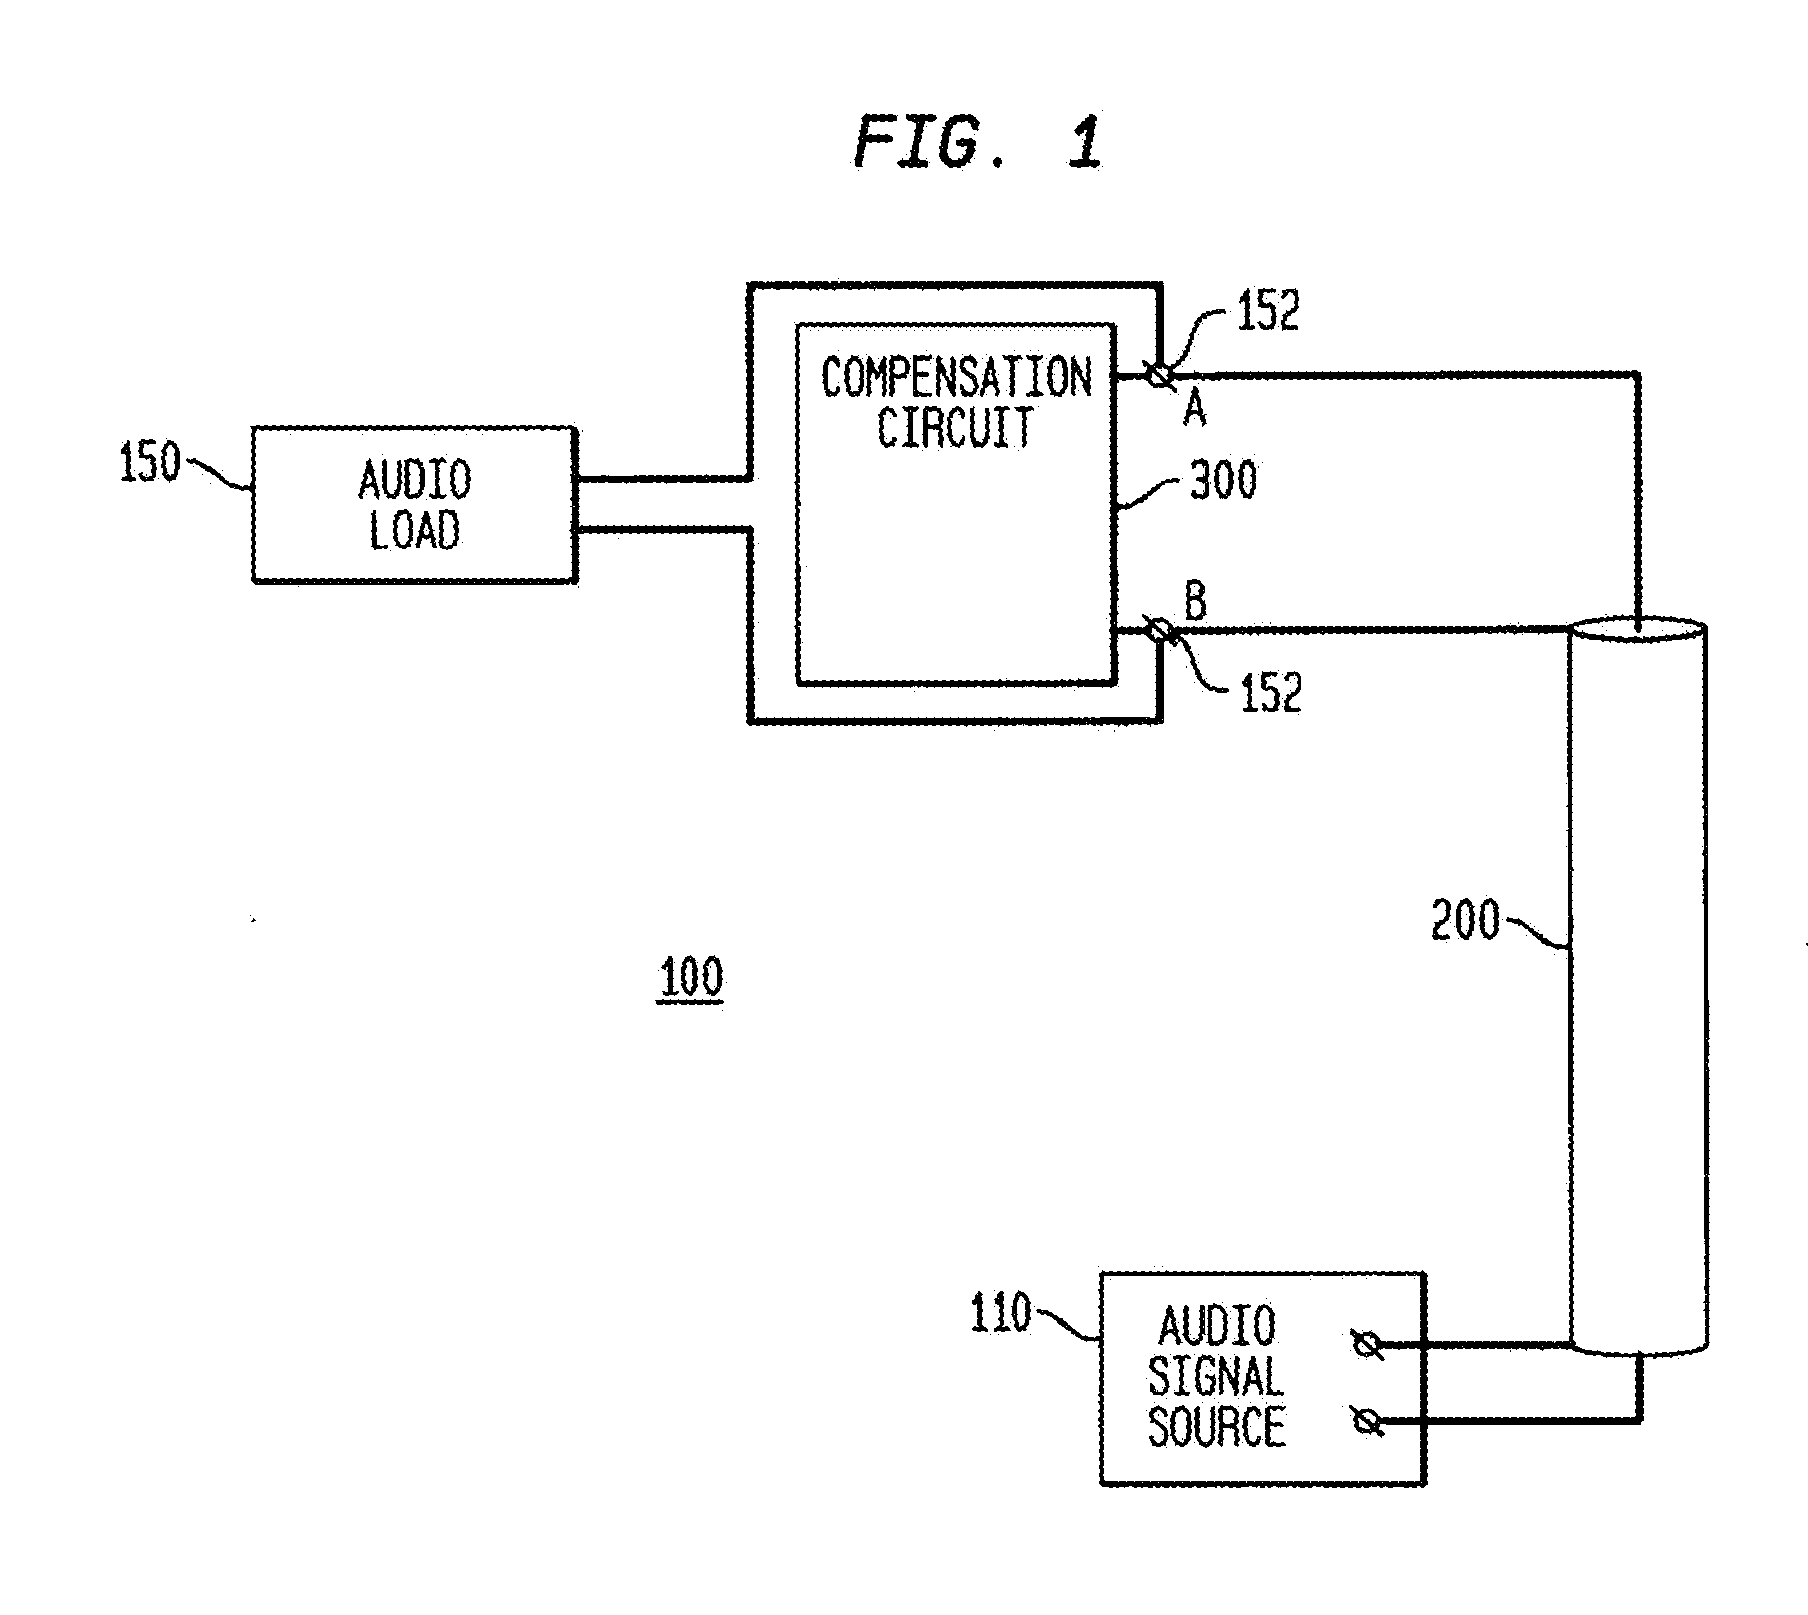 Impedance matching speaker wire system